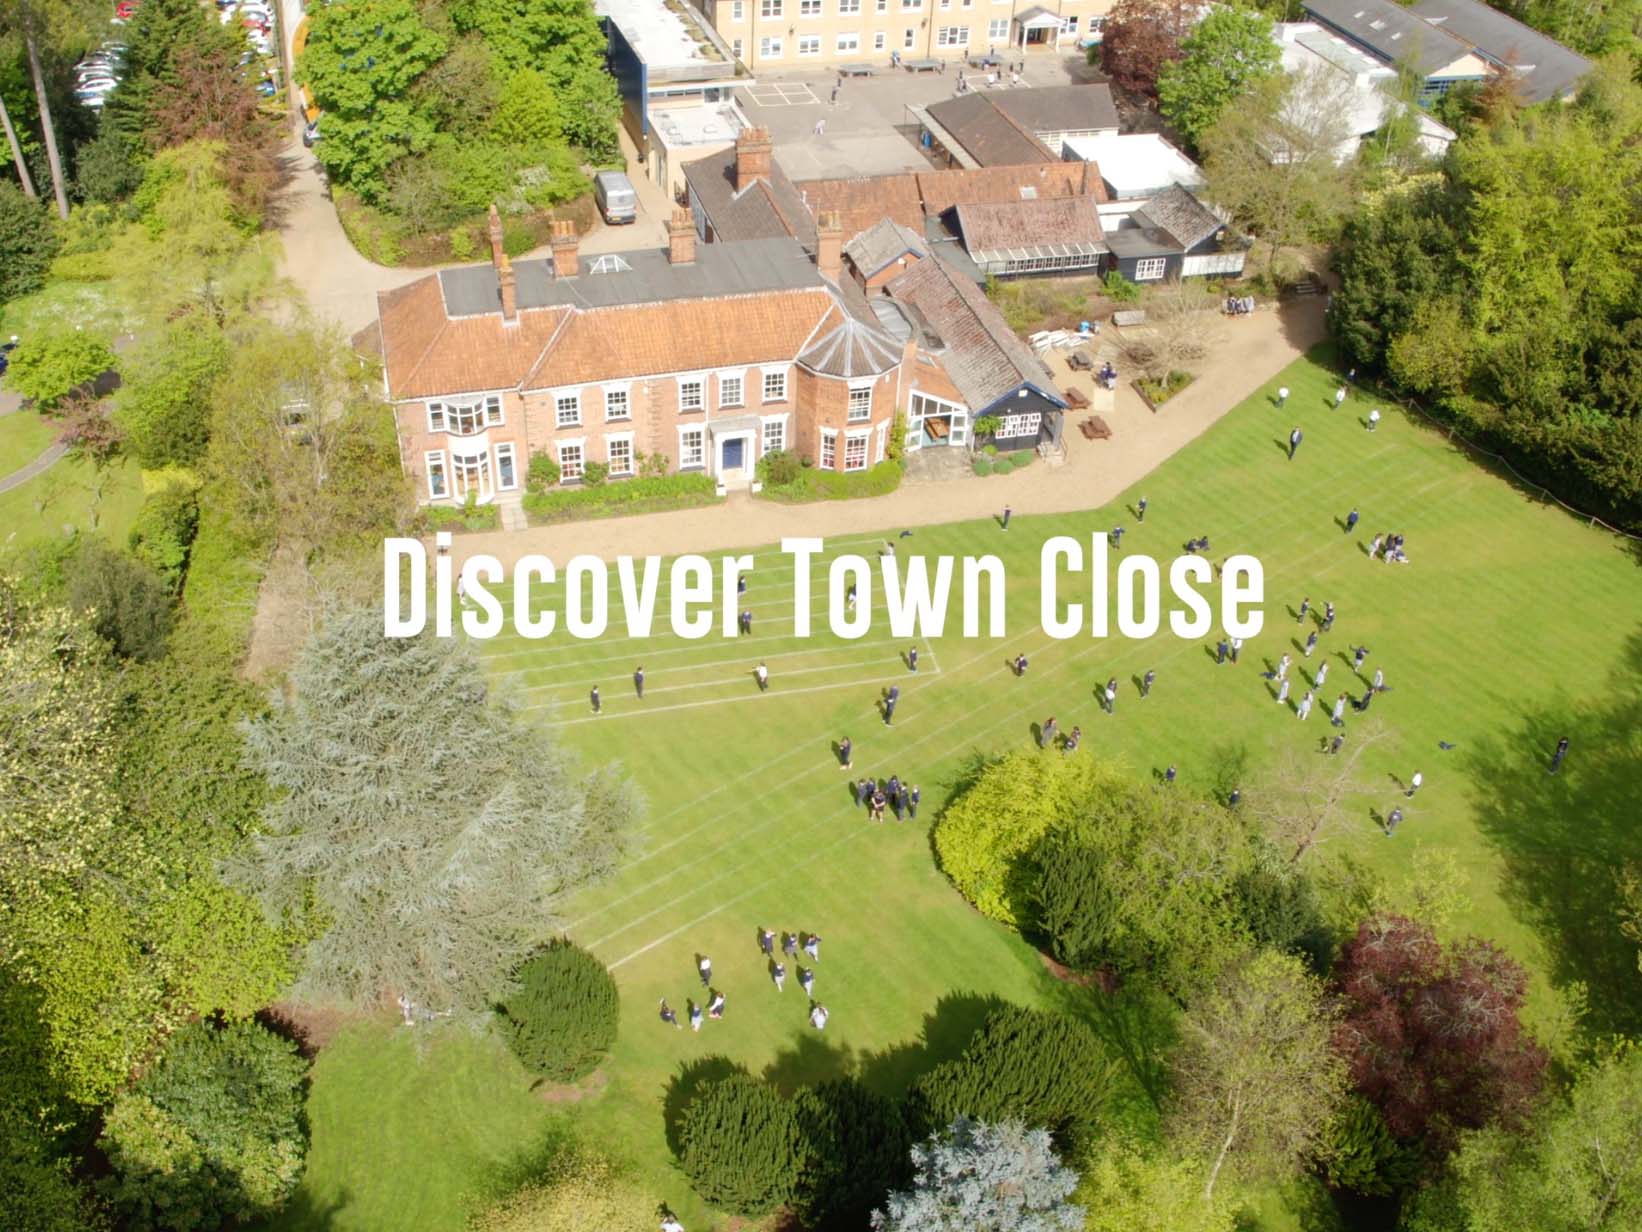 Image of an aerial view of Town Close Pre Preparatory Independent School taken from a drone promotional video produced by Vortex Visual